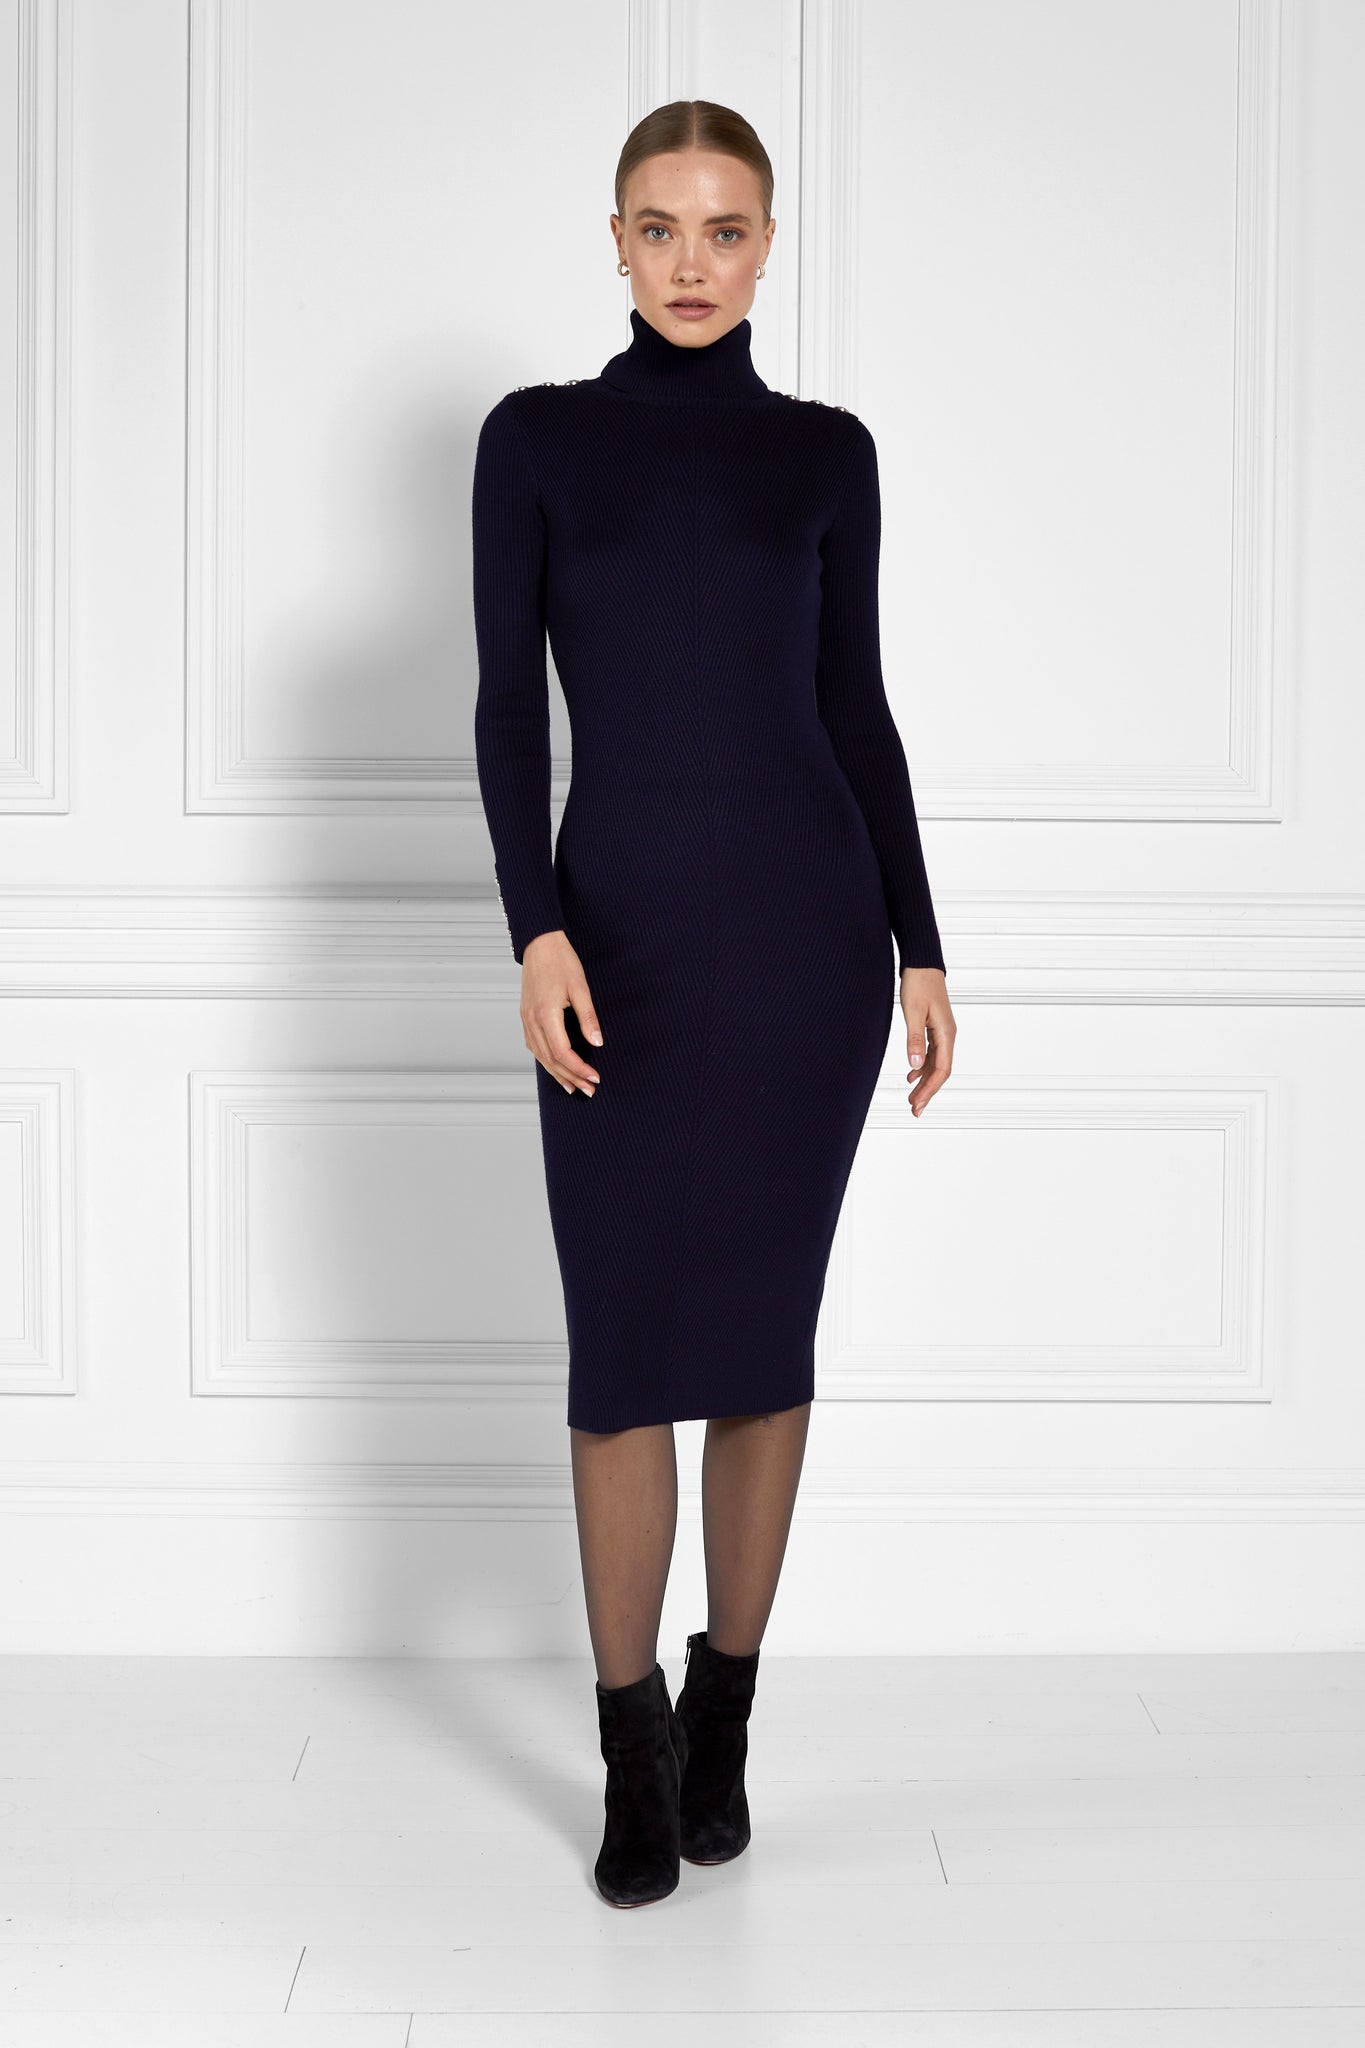 womens navy knitted roll neck midi dress with gold buttons on cuffs and shoulders with black heeled ankle boots